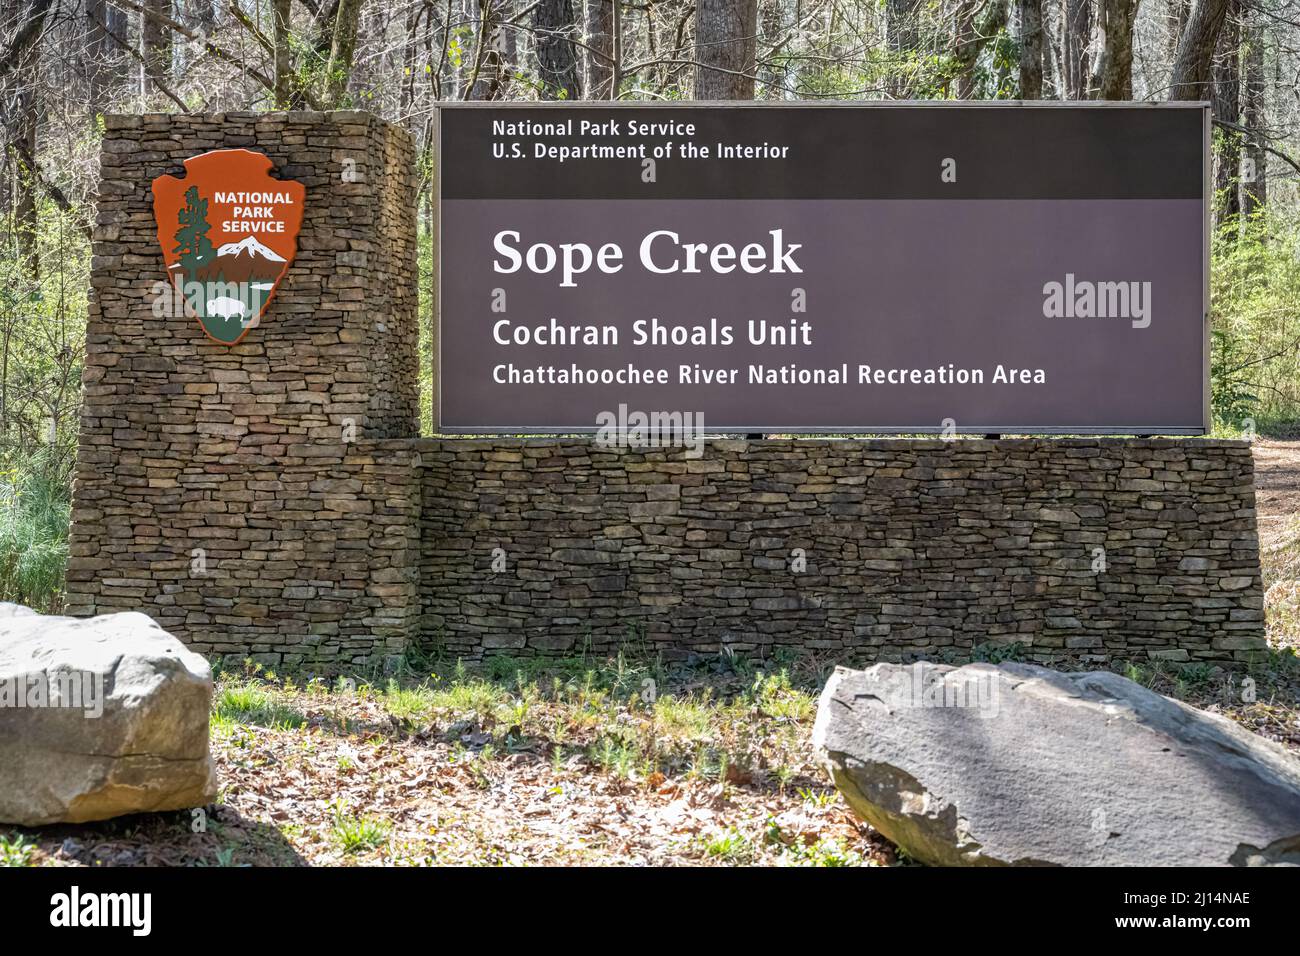 National Park Service sign at the entrance to Sope Creek, site of the Sope Creek Mill Ruins and multiple hiking trails in Marietta, Georgia. (USA) Stock Photo